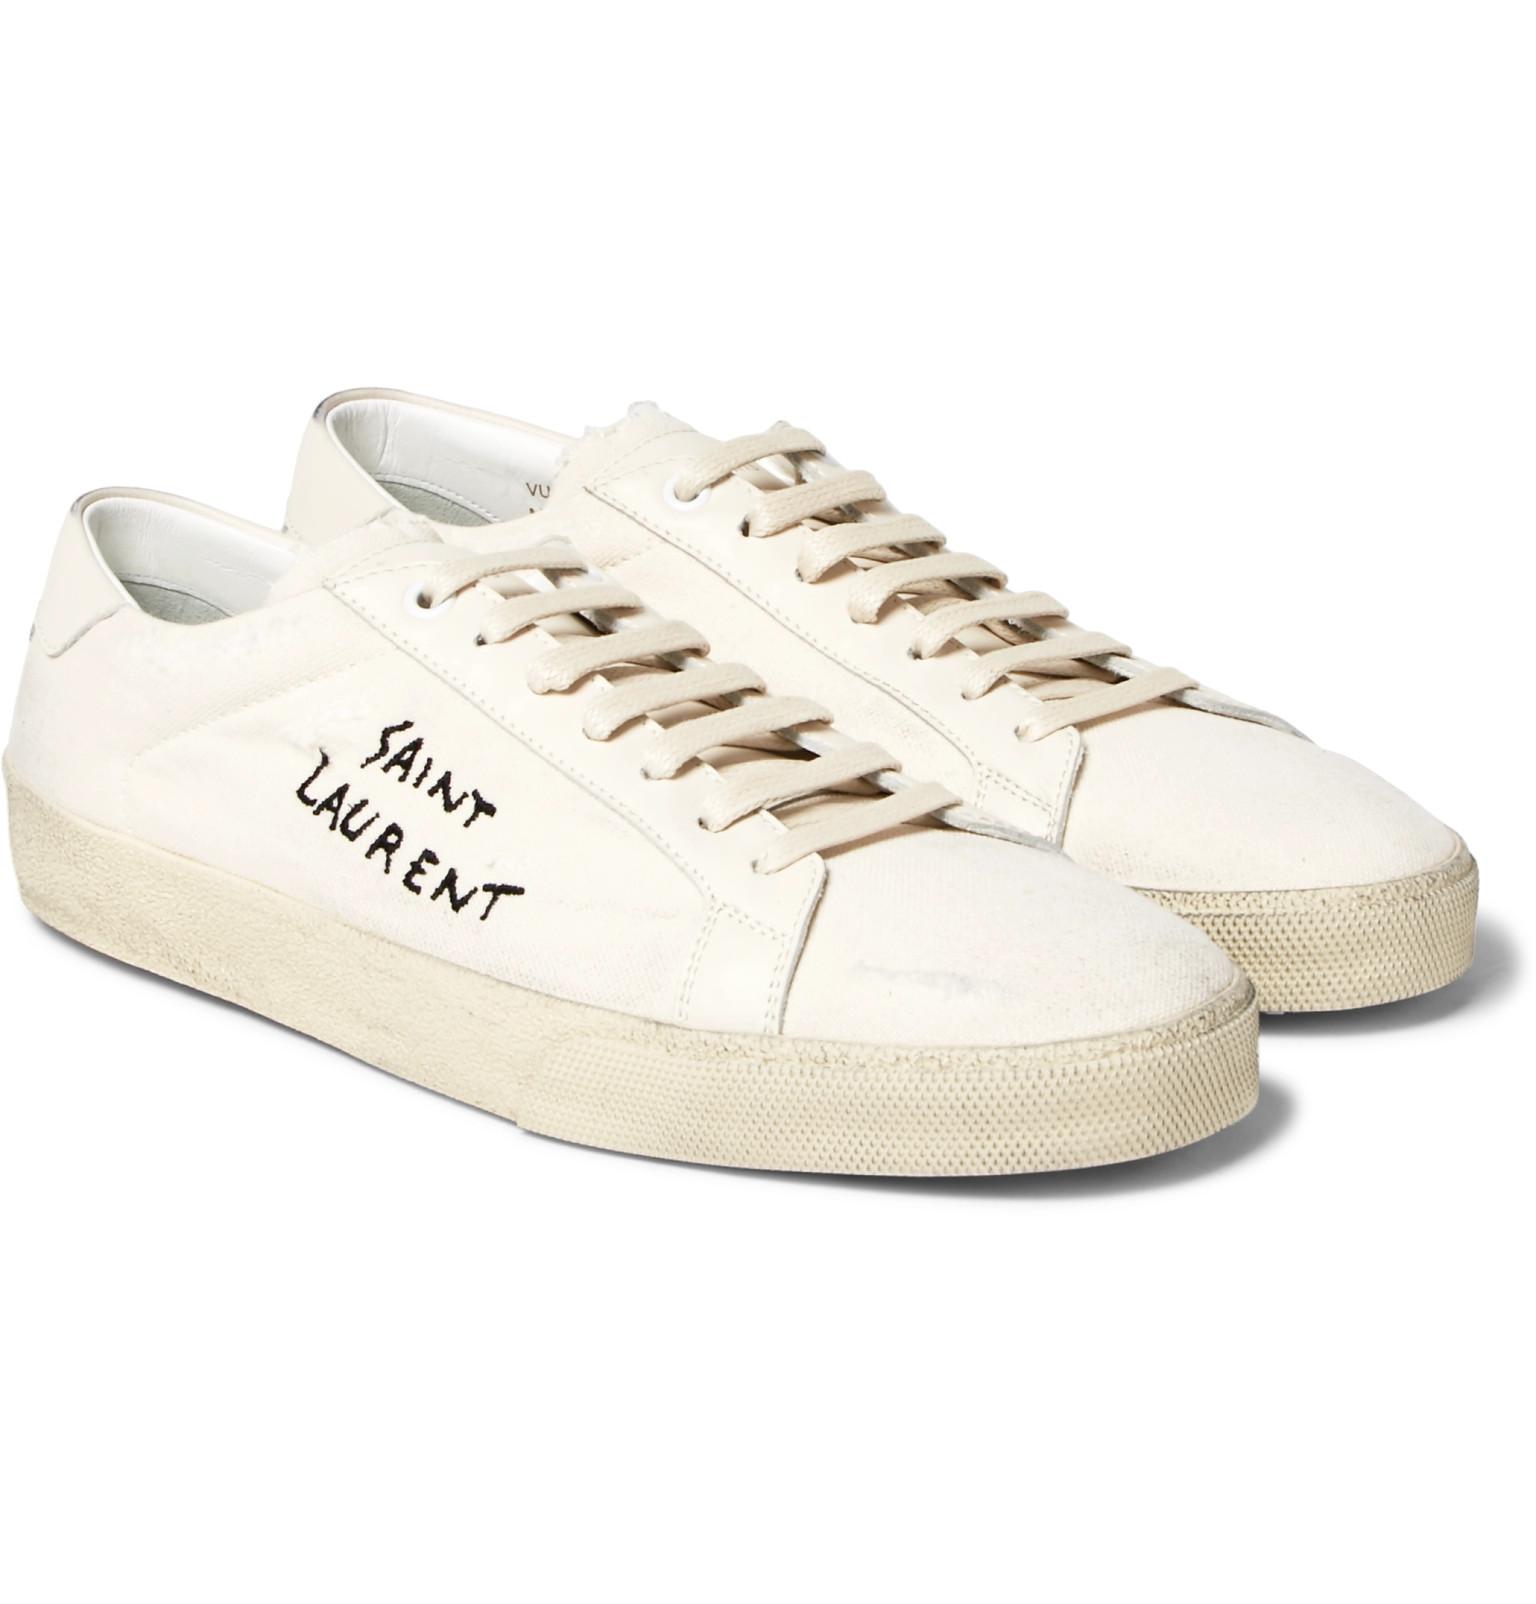 Saint Laurent Sl/06 Distressed Canvas Sneakers in White for Men - Lyst